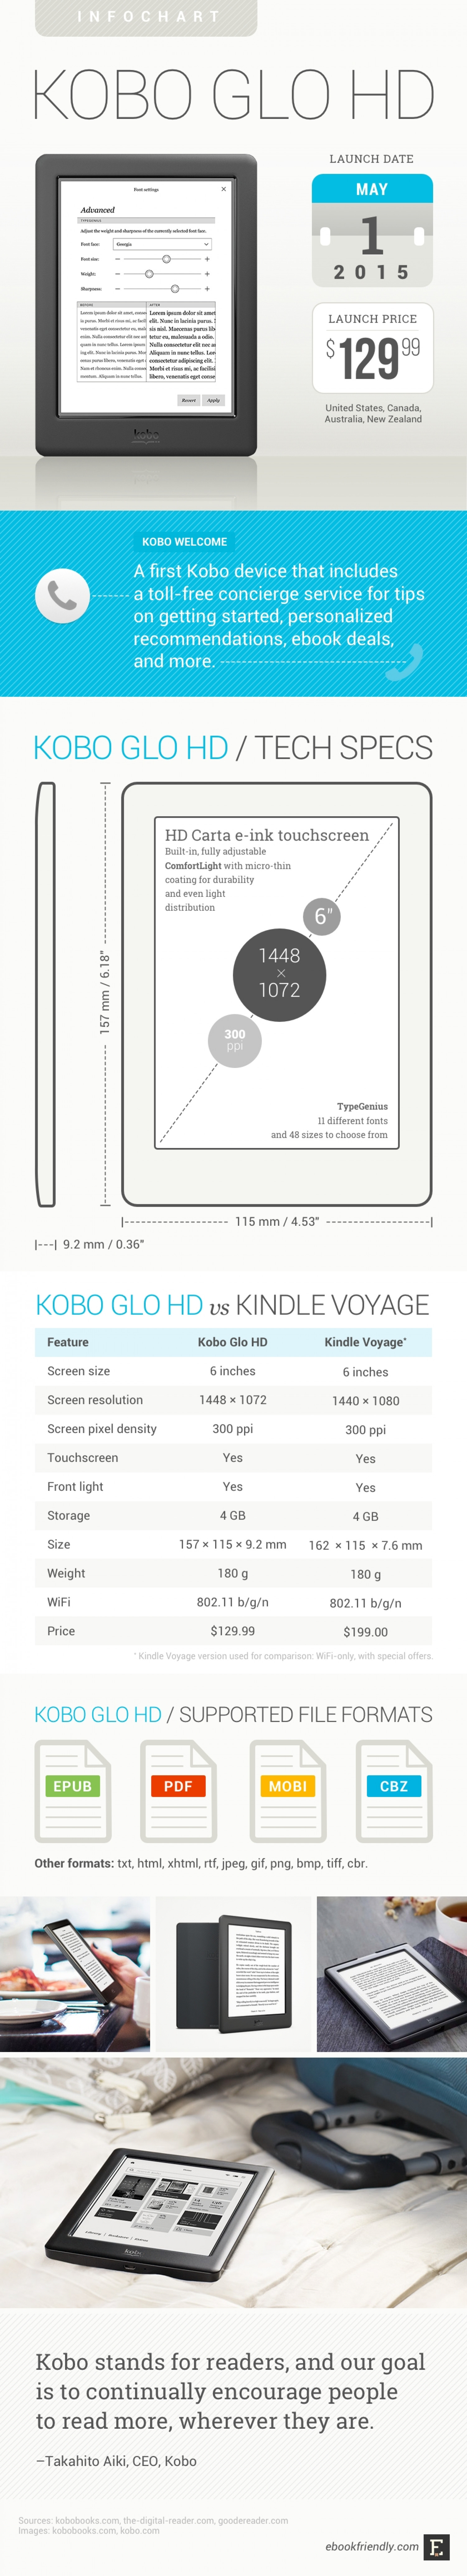 All you wanted to know about Kobo Glo HD Infographic